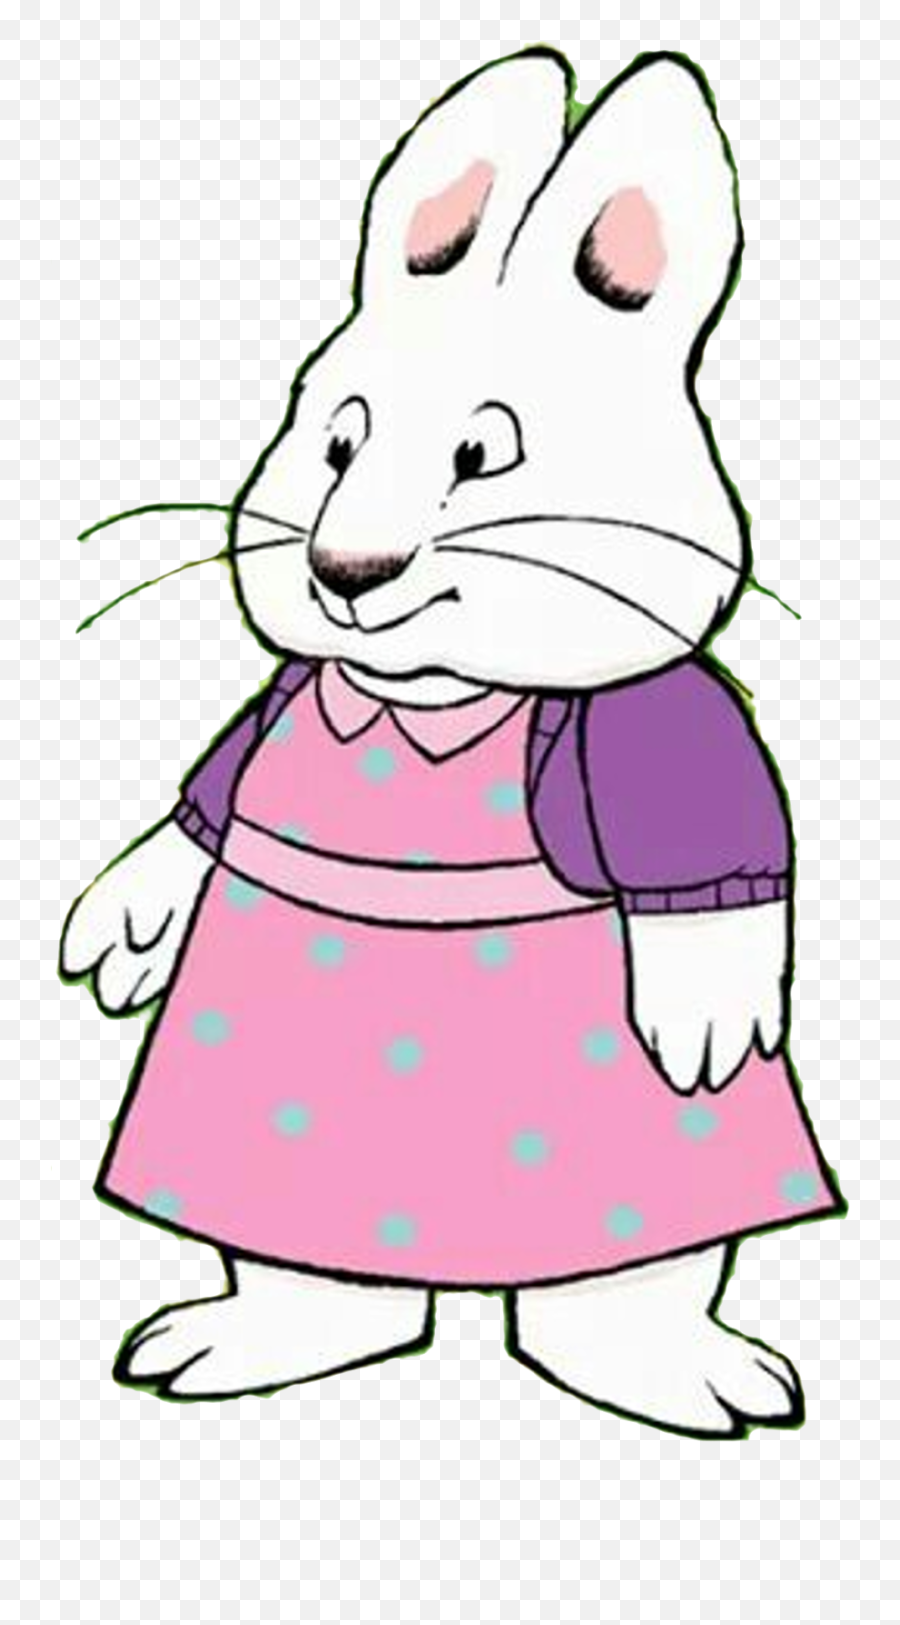 Cartoon Characters Max U0026 Ruby New Pngu0027s - Ruby From Max And Ruby,Ruby Png